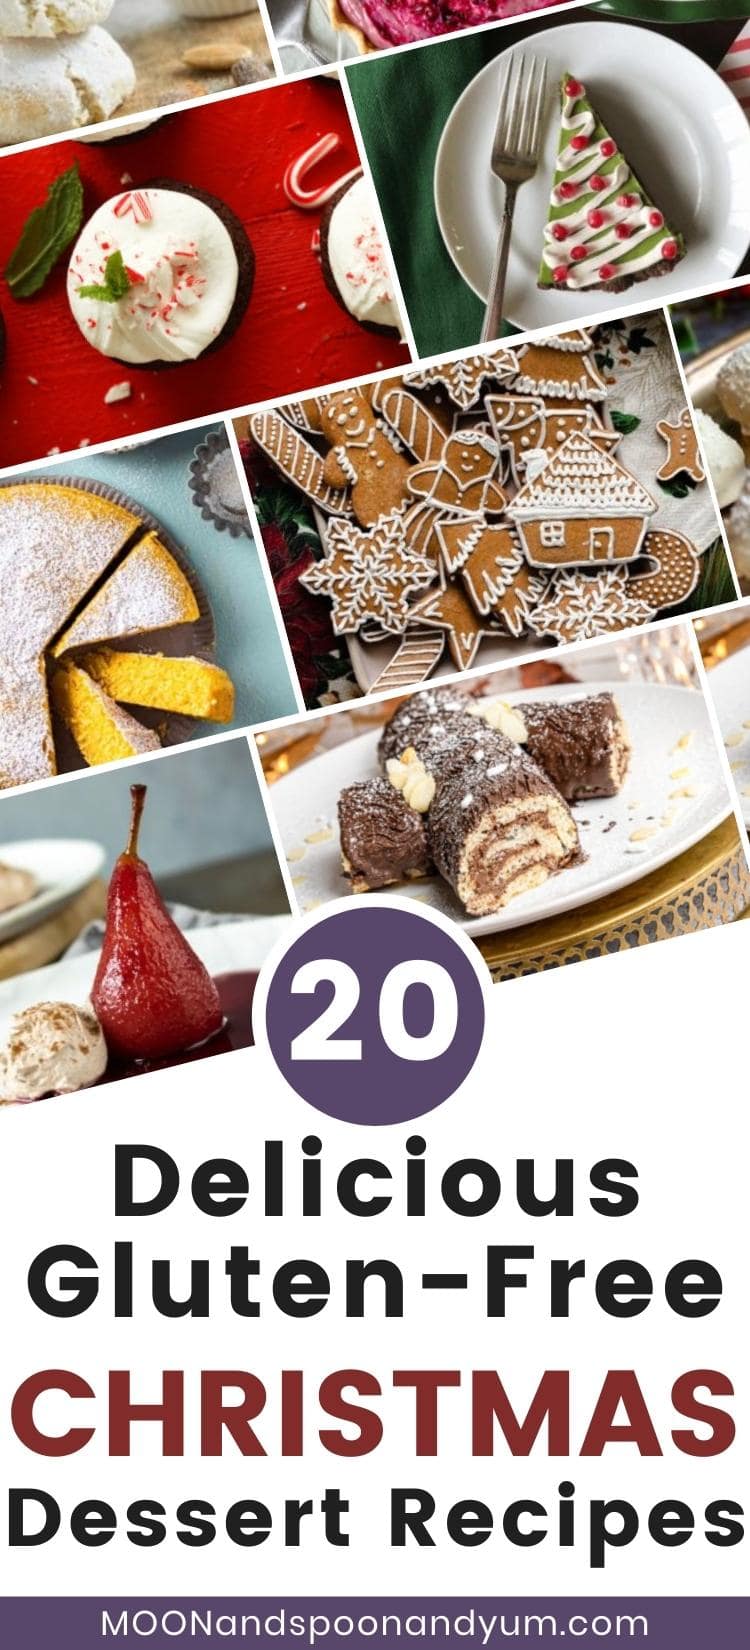 20 Delicious Gluten-Free Christmas Desserts - MOON and spoon and yum